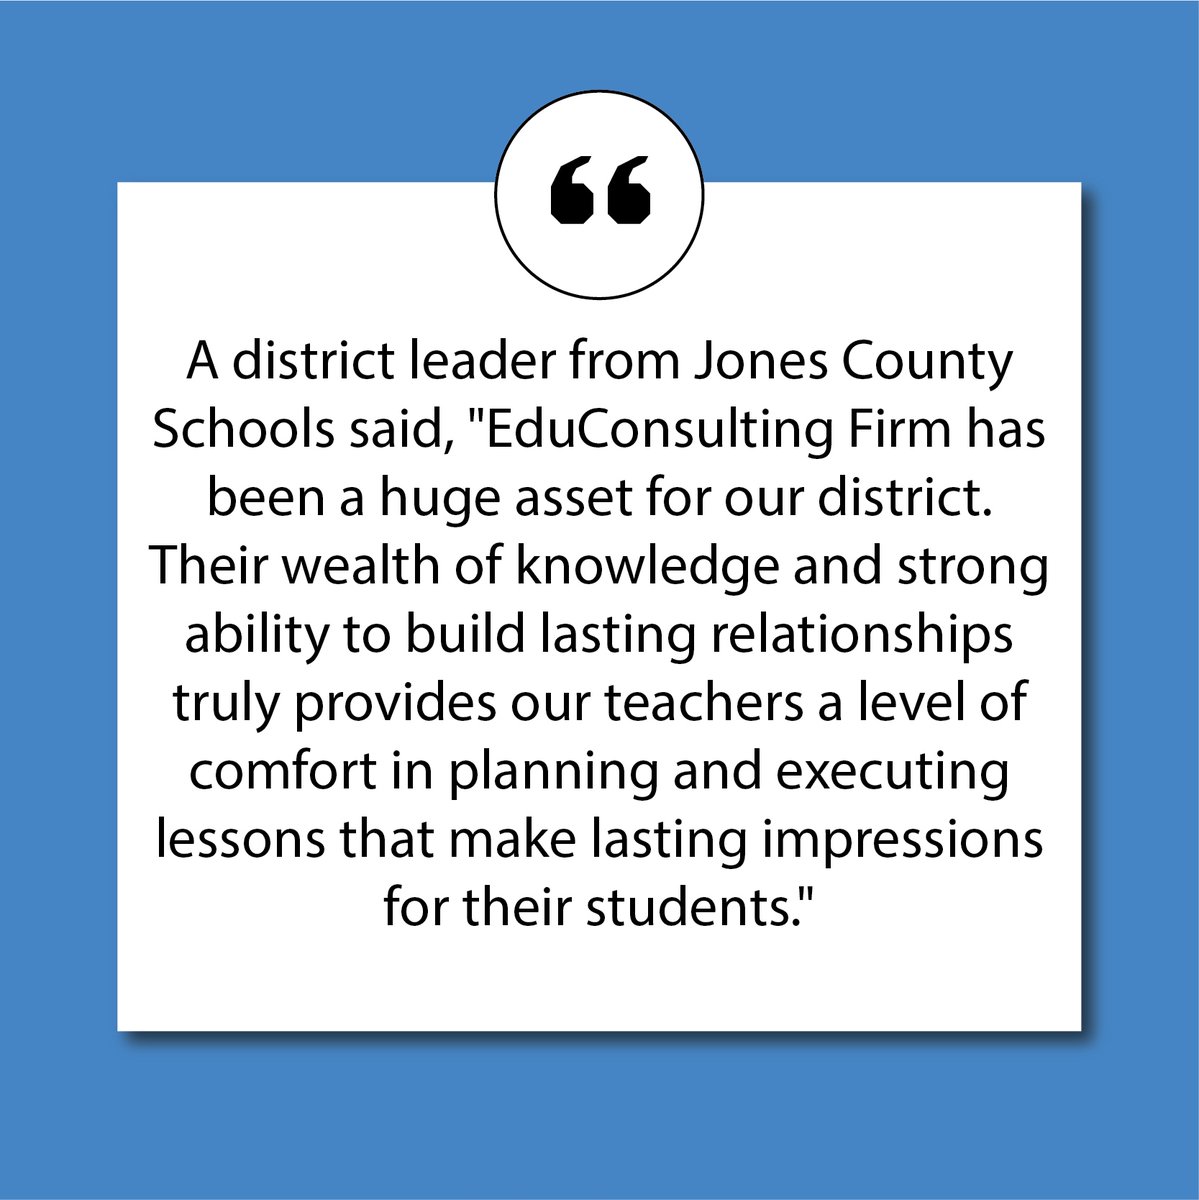 #ThursdayTestimonial 
'Their [EduConsulting Firm] wealth of knowledge and strong ability to build lasting relationships truly provides our teachers a level of comfort in planning and executing lessons that make lasting impressions for their students.'